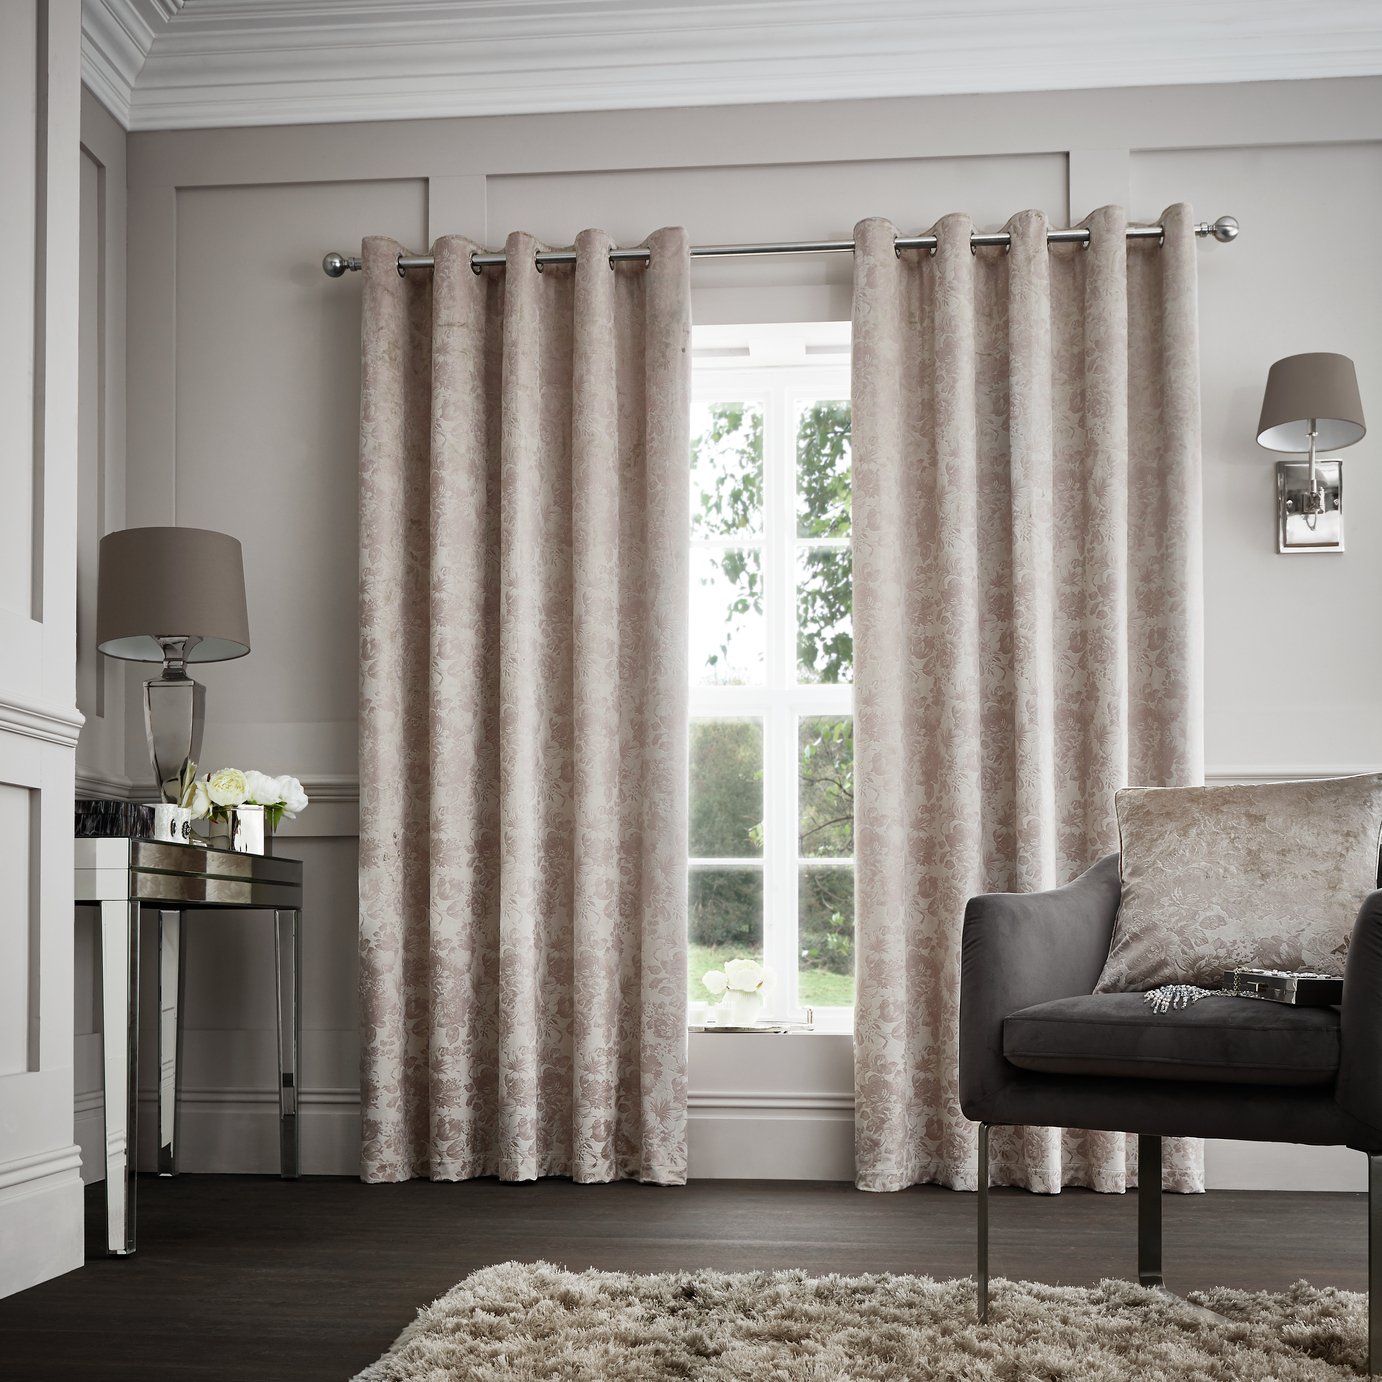 Curtina Downton Lined Curtains - 229x229cm - Mink